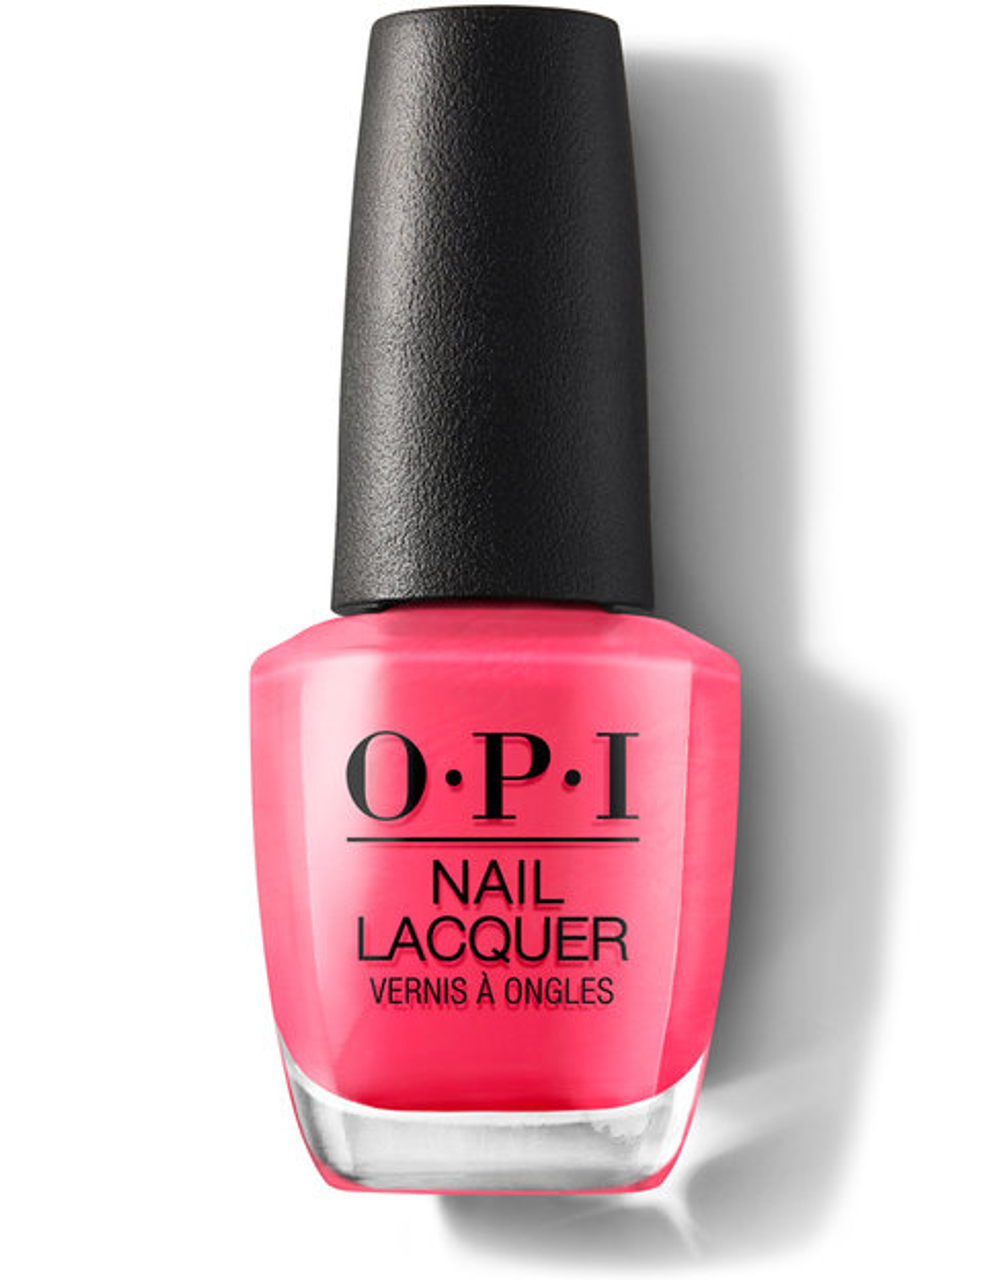 OPI supplier of Nail Lacquer, Infinite Shine and GelColor to beauty salons  & retailers | CS&Co. Beauty Solutions, NZ.